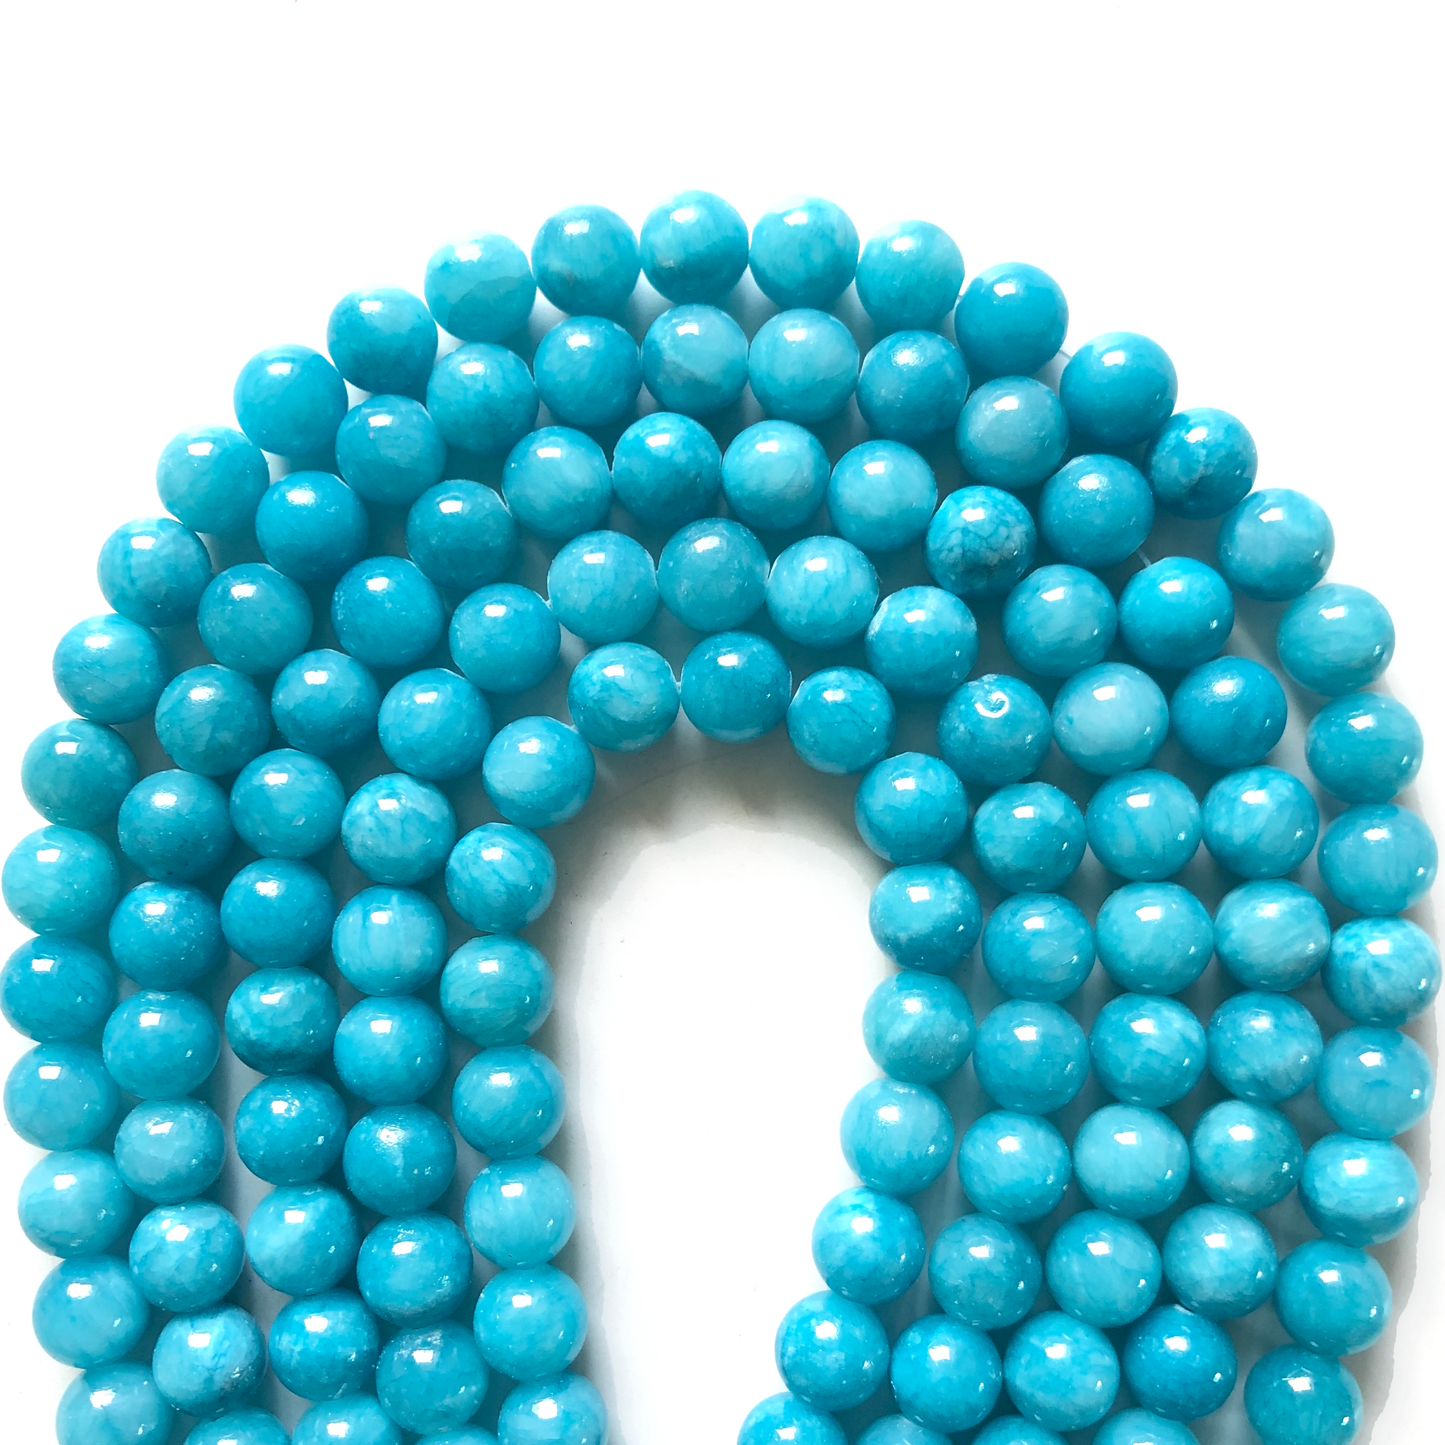 2 Strands/lot 10mm Light Blue Turquoise Jade Round Stone Beads Stone Beads New Beads Arrivals Round Jade Beads Charms Beads Beyond